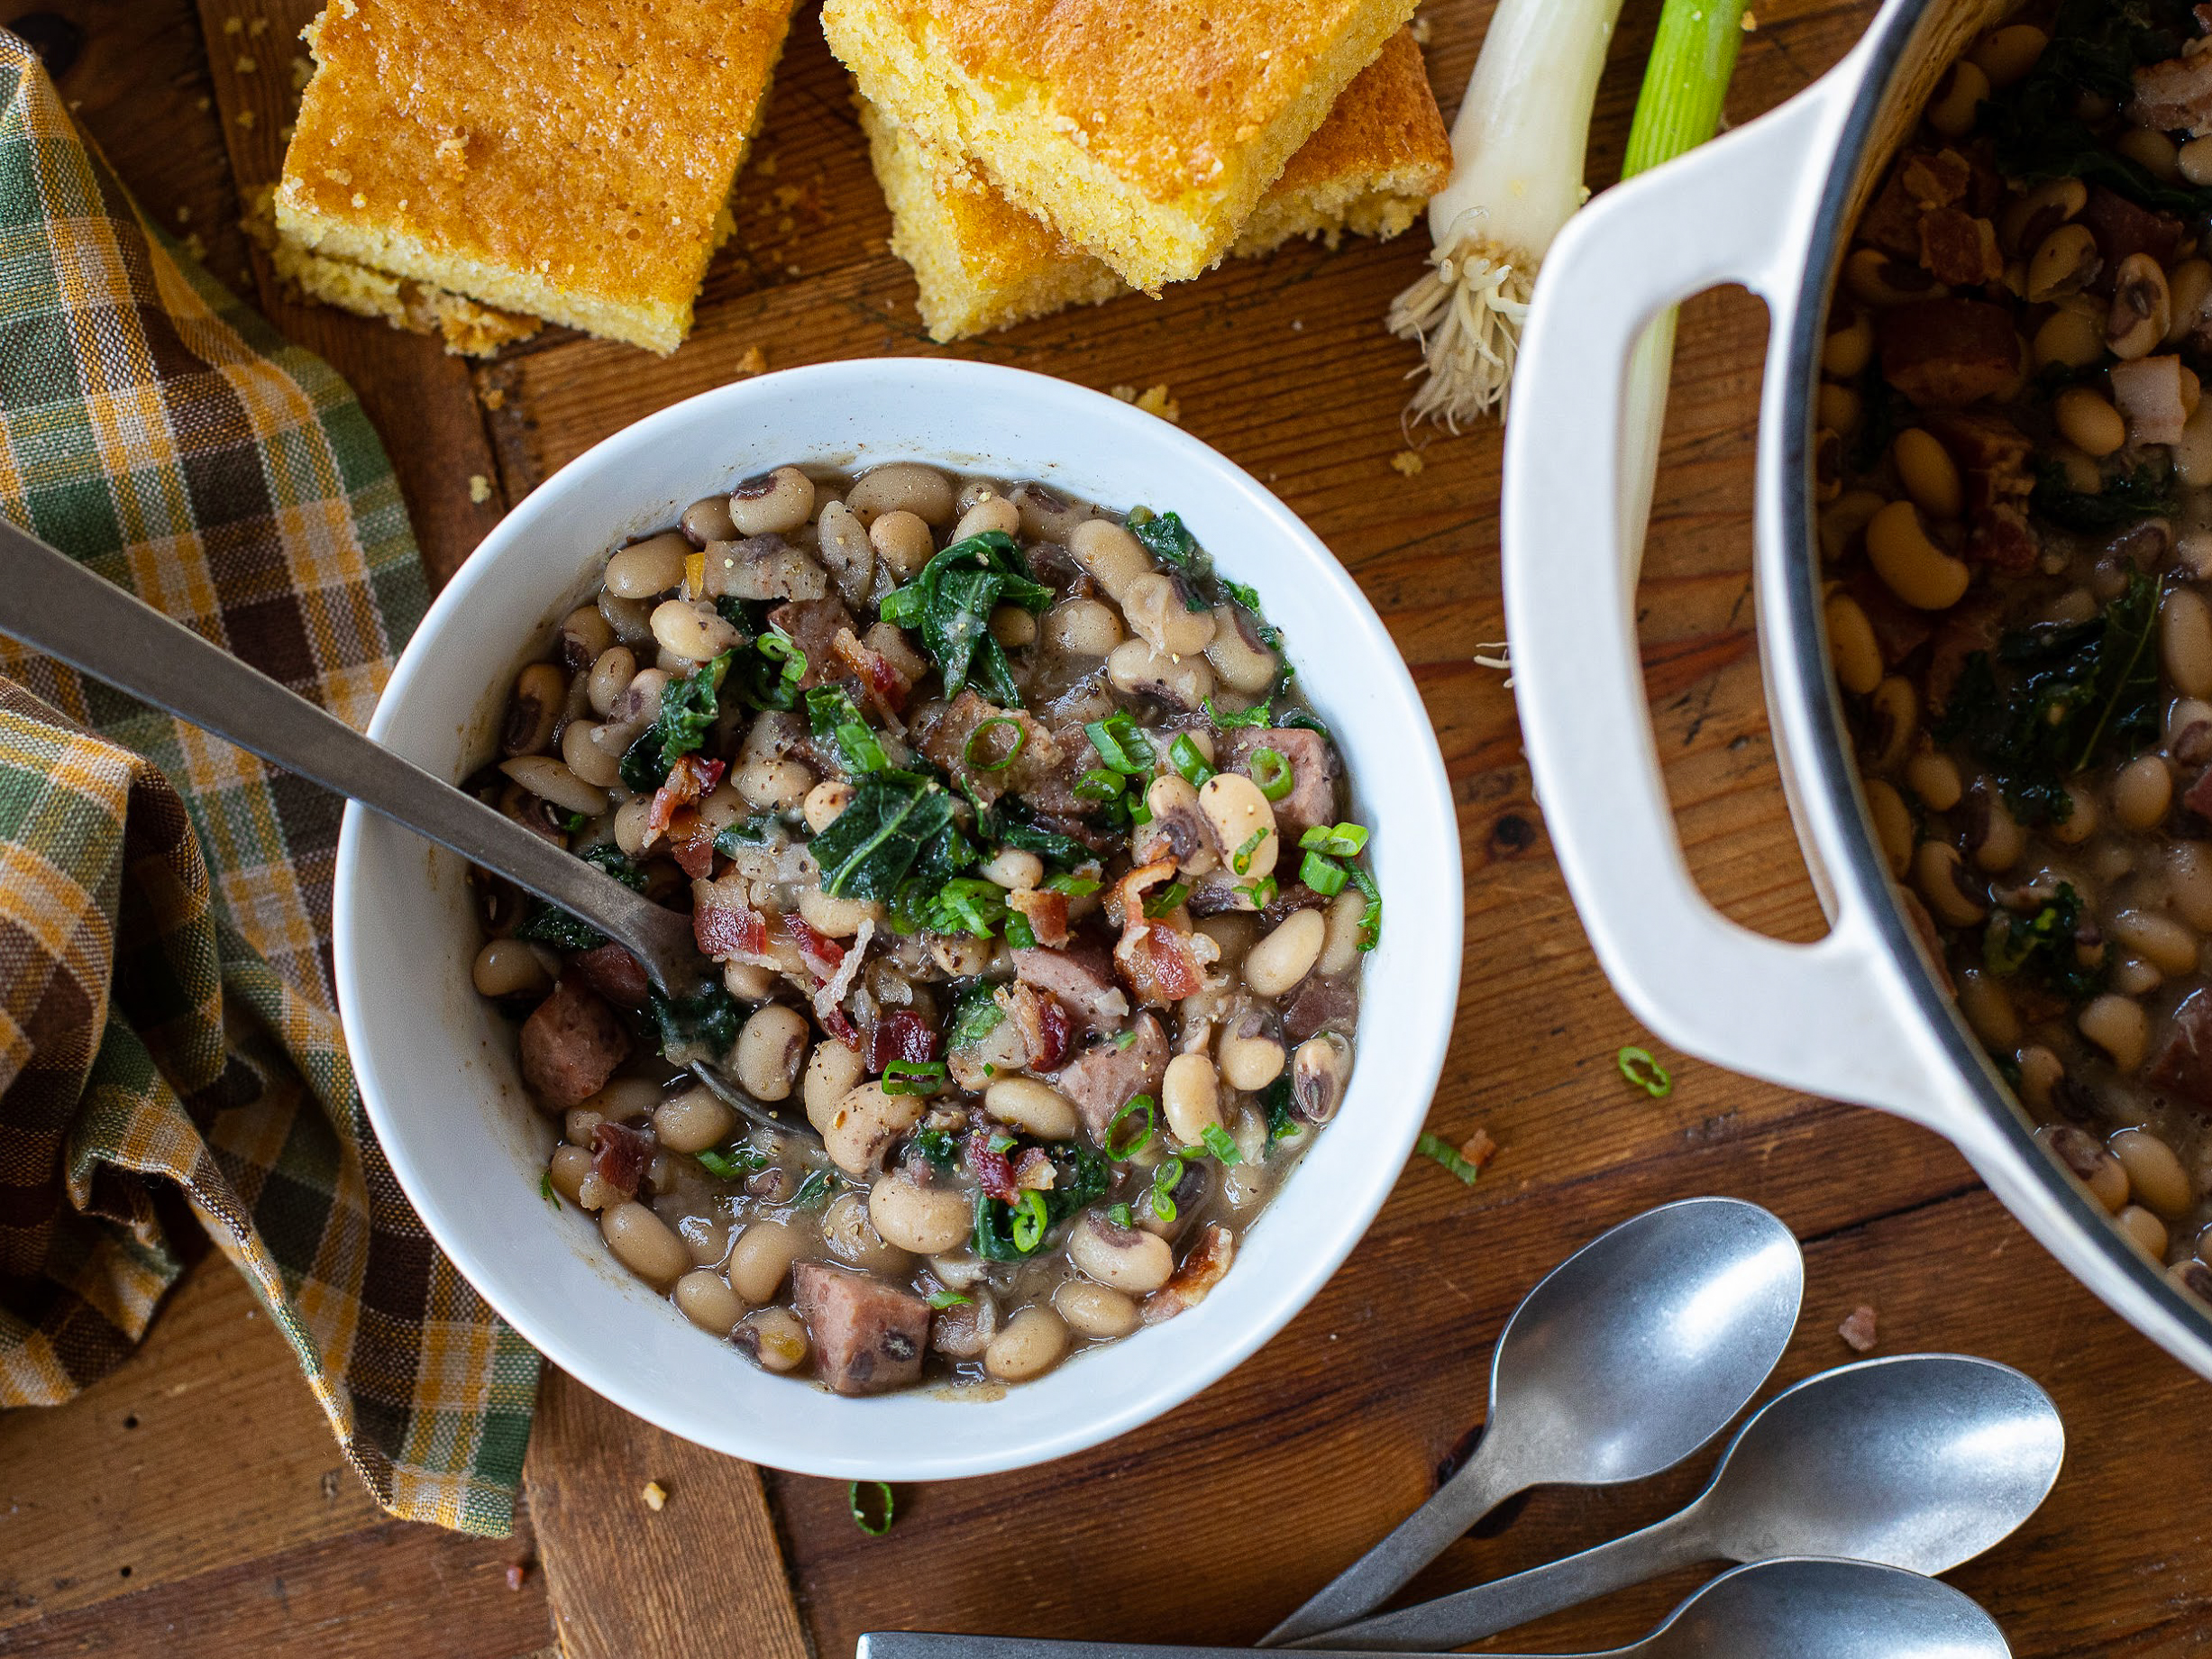 Pick Up Some Hatfield Bacon For Your New Year's Meal - Black Eyed Peas With Bacon & Greens! on I Heart Publix